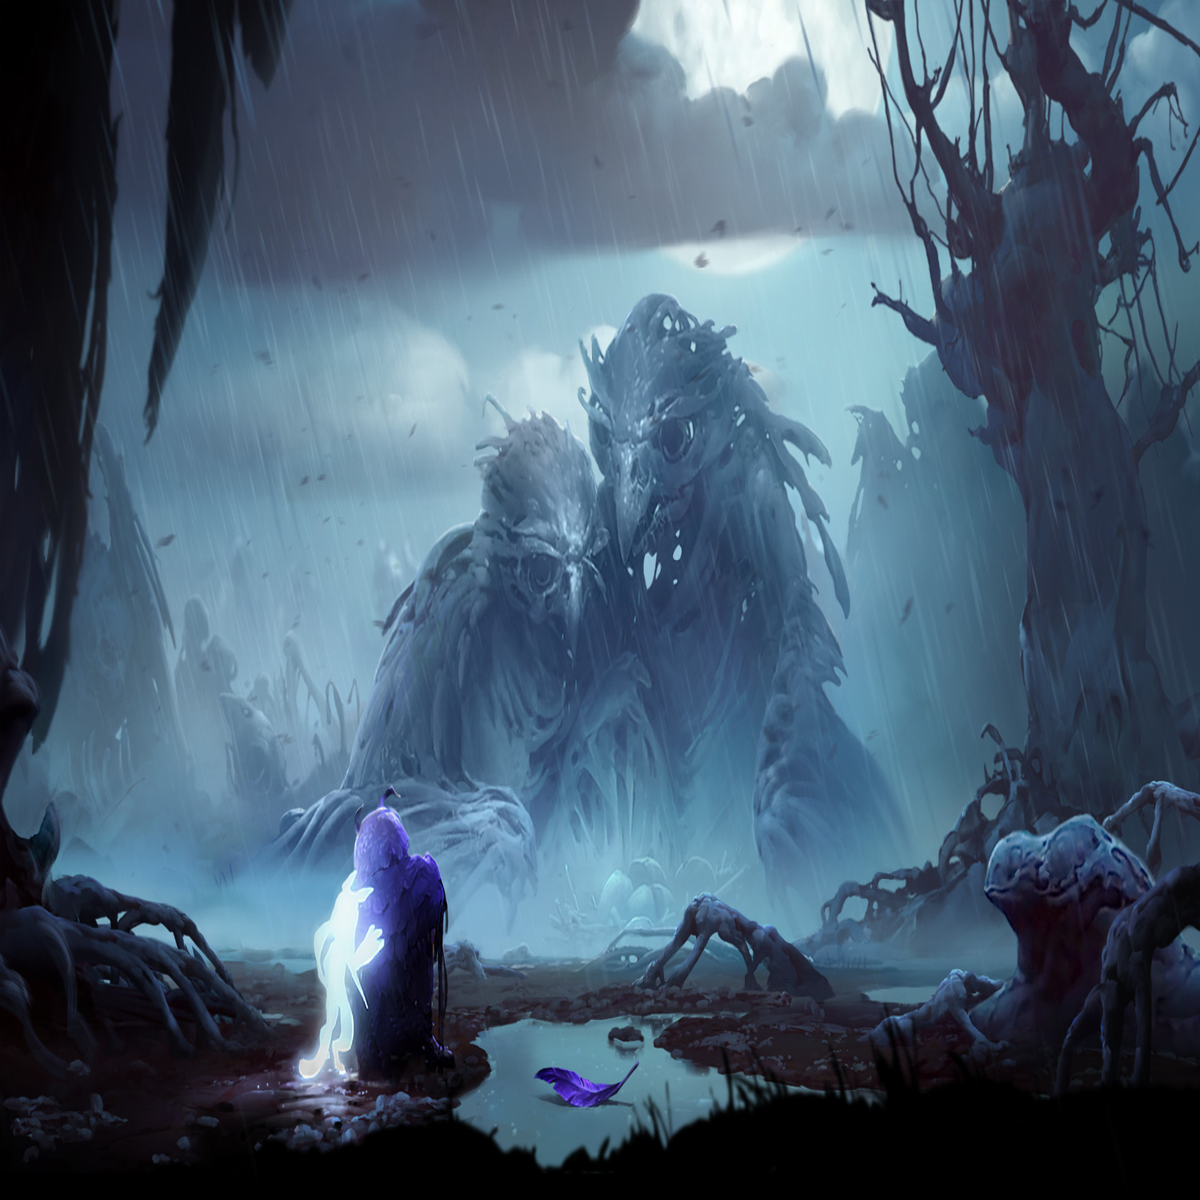 Coming Soon to Xbox Game Pass for PC: Ori and The Will of the